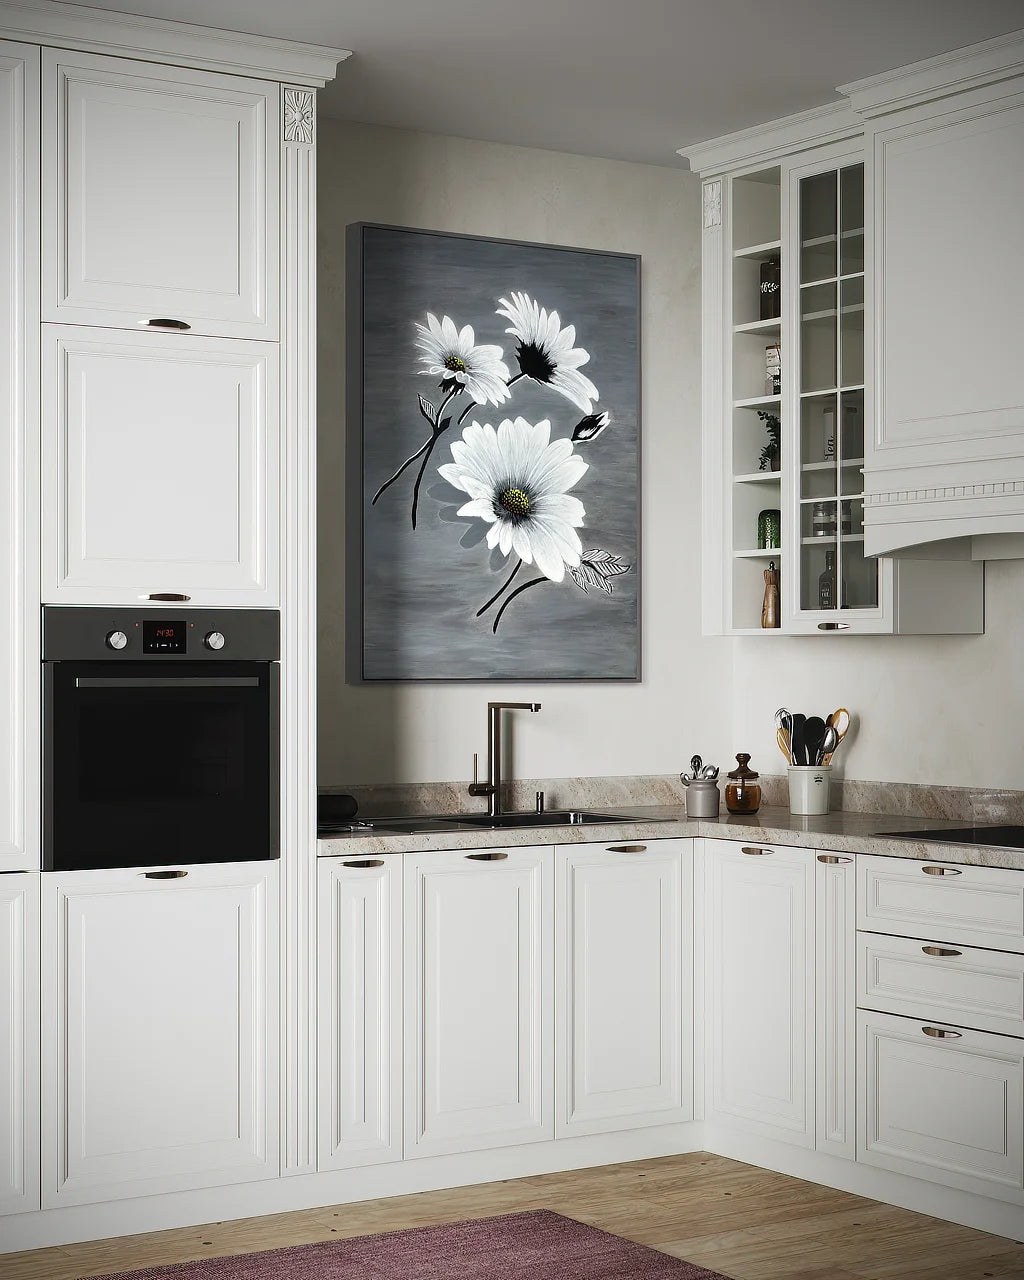 In the Wind canvas  print in kitchen